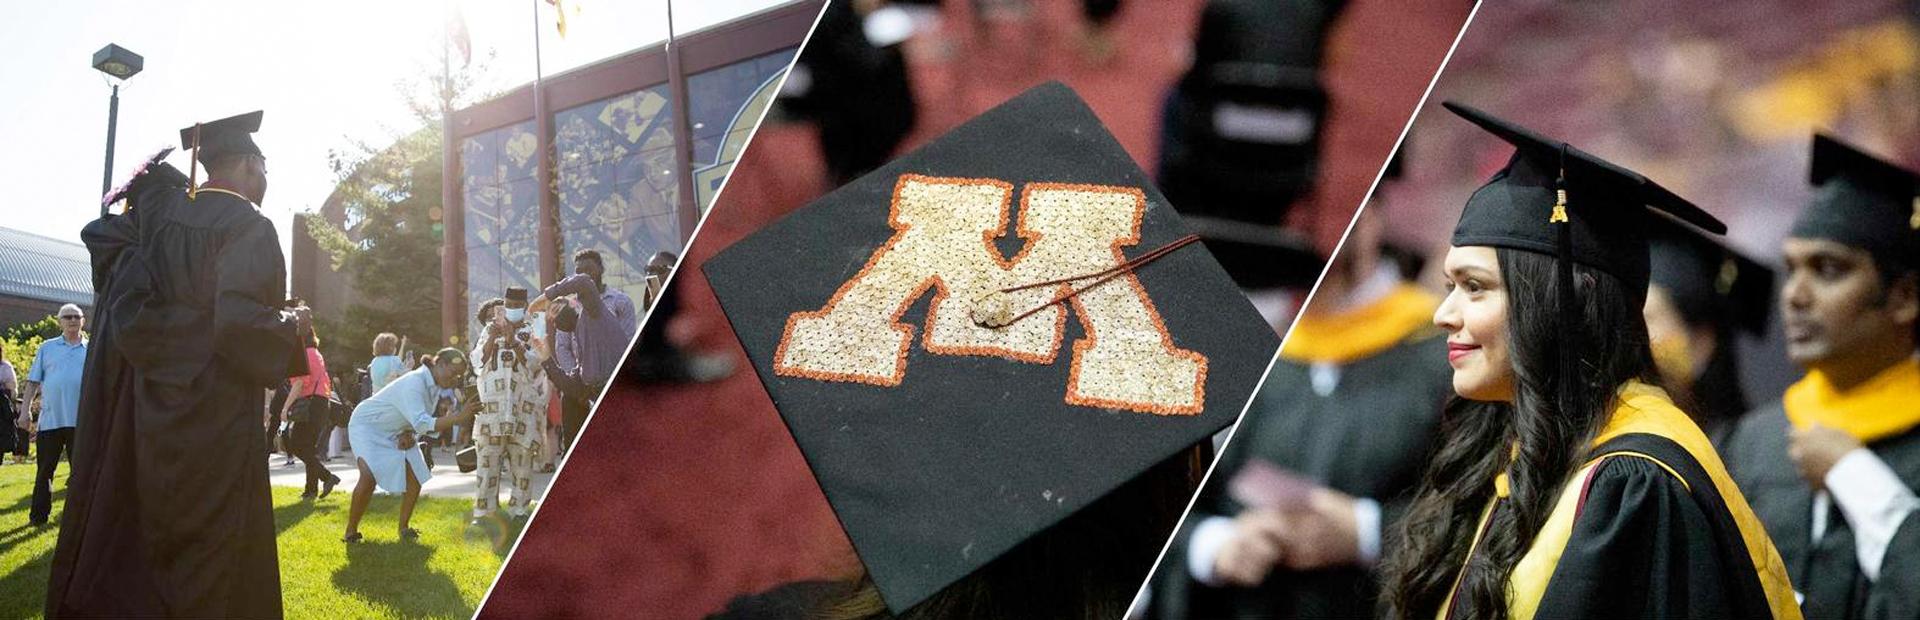 Three photos from commencement ceremonies: Graduates in caps and gowns celebrating outside, a cap with the M logo on it, and a graduate smiling